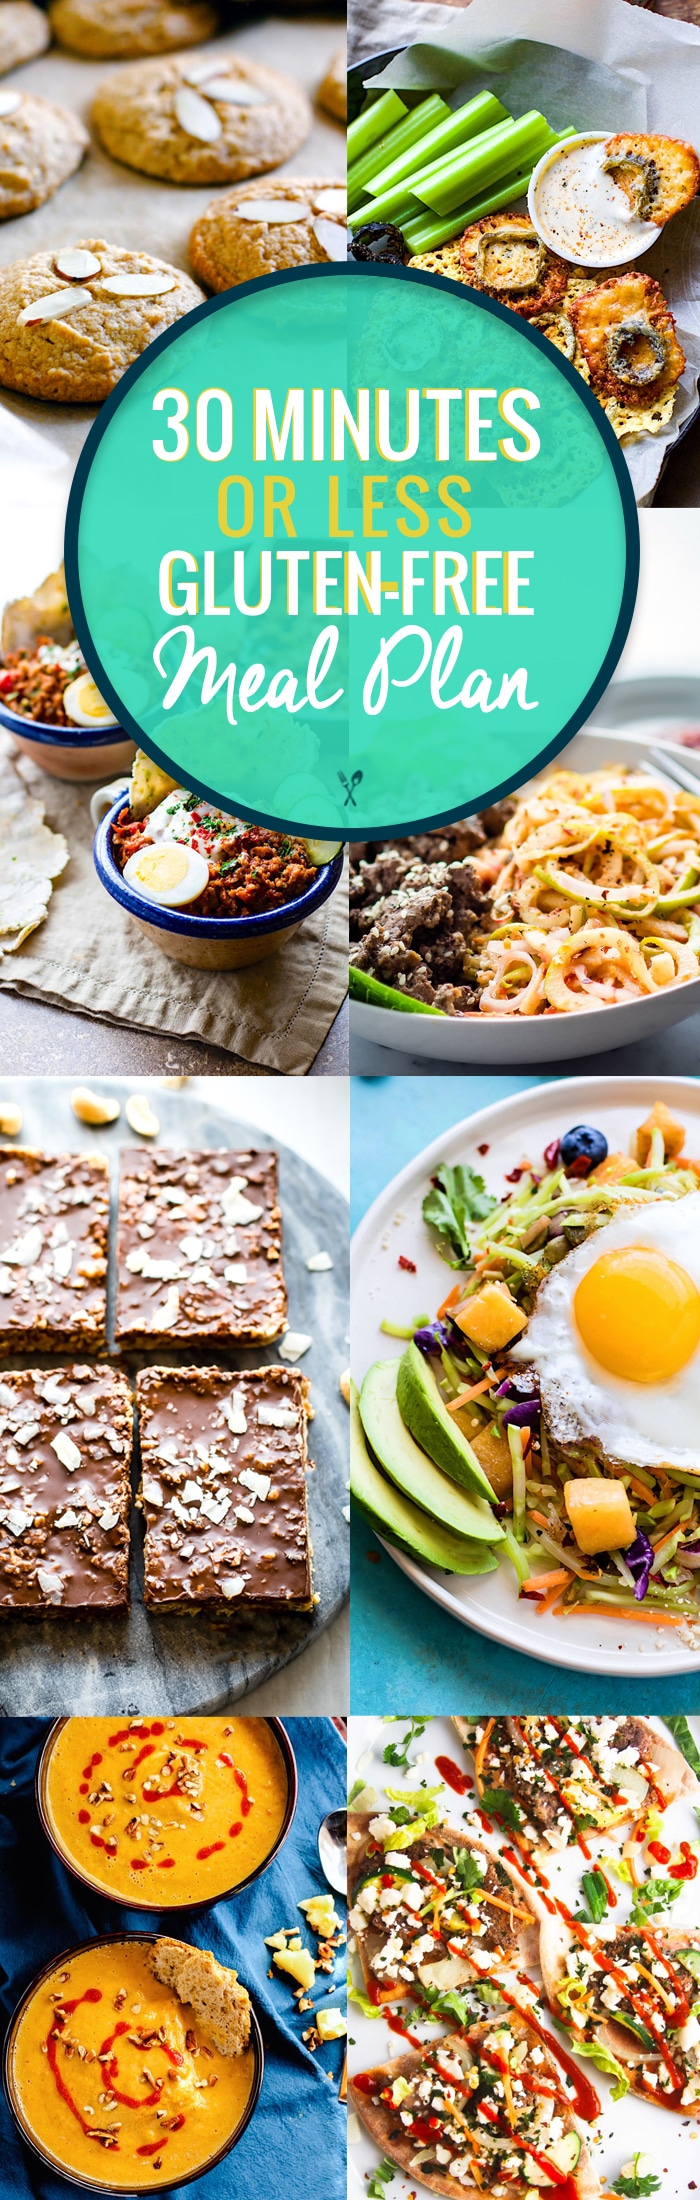 A gluten free meal plan with recipes that are quick and healthy! 30 minutes is all you need to make these simple gluten free meal plan recipes! Great for meal prep and holiday planning. Easy and delicious meals, snacks, and desserts. #MEALPLAN #GLUTENFREE